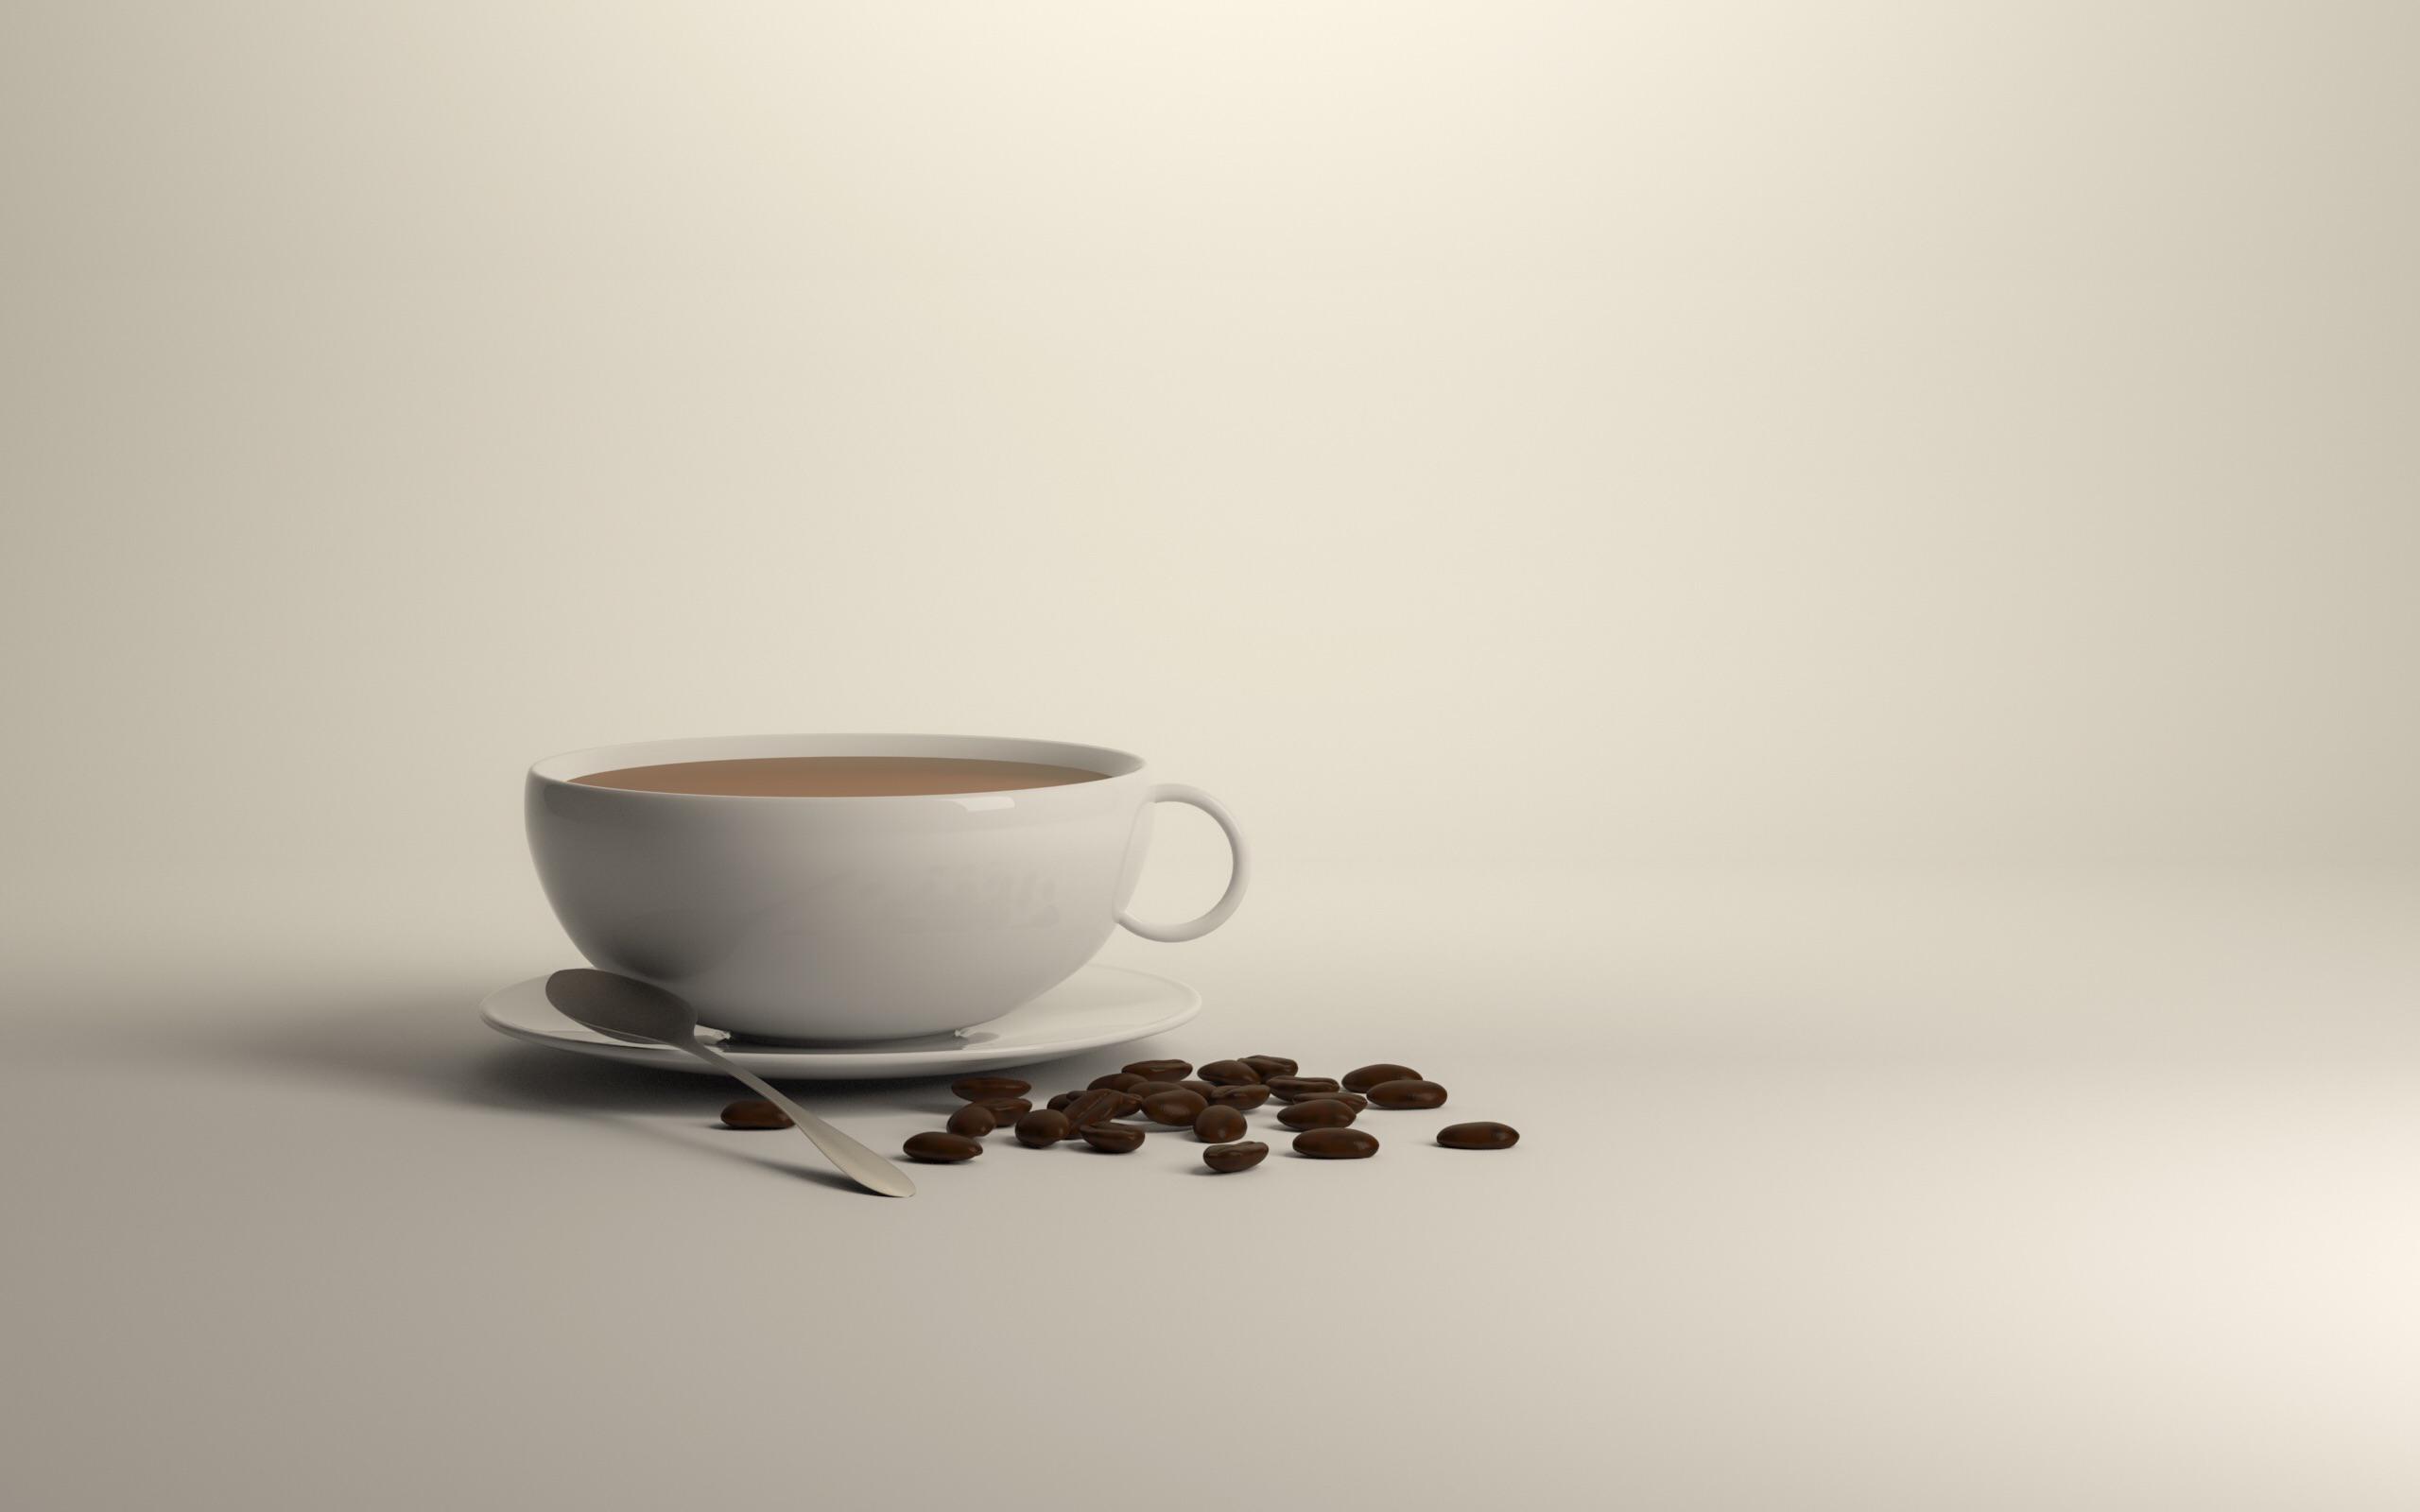 cup wallpaper,cup,coffee cup,caffeine,cup,still life photography